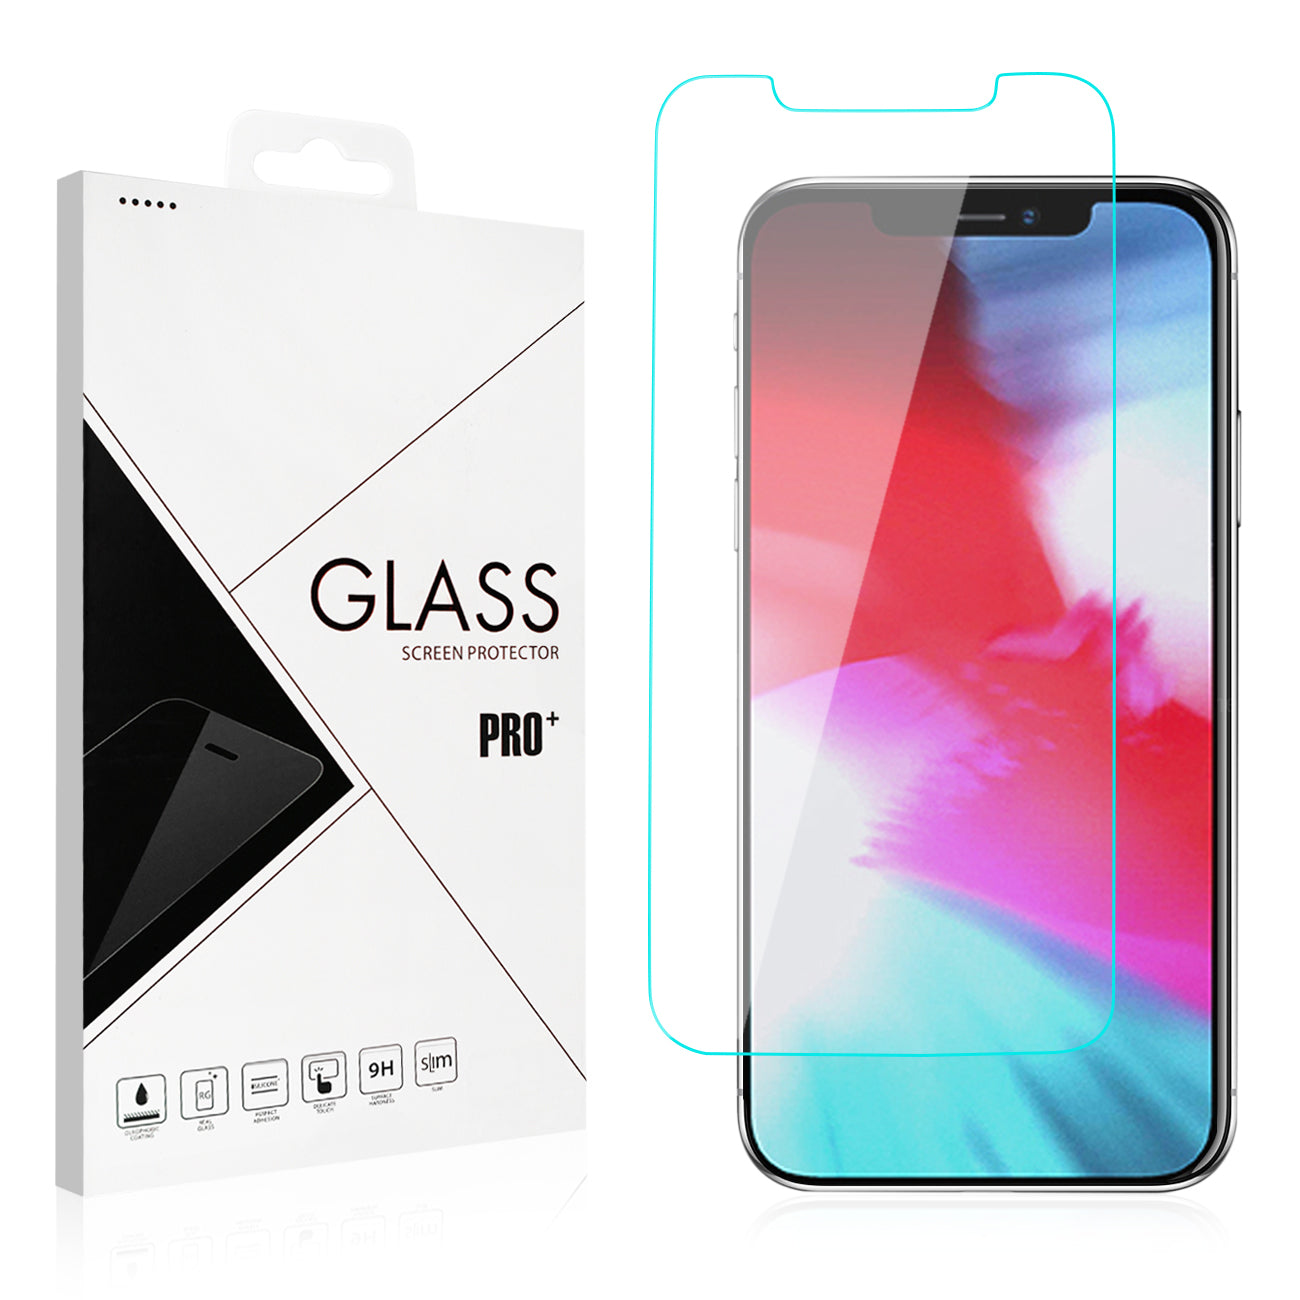 Premium Single retail Pack 2.5D Tempered Glass for iPhone 12 Mini 5.4 INCH